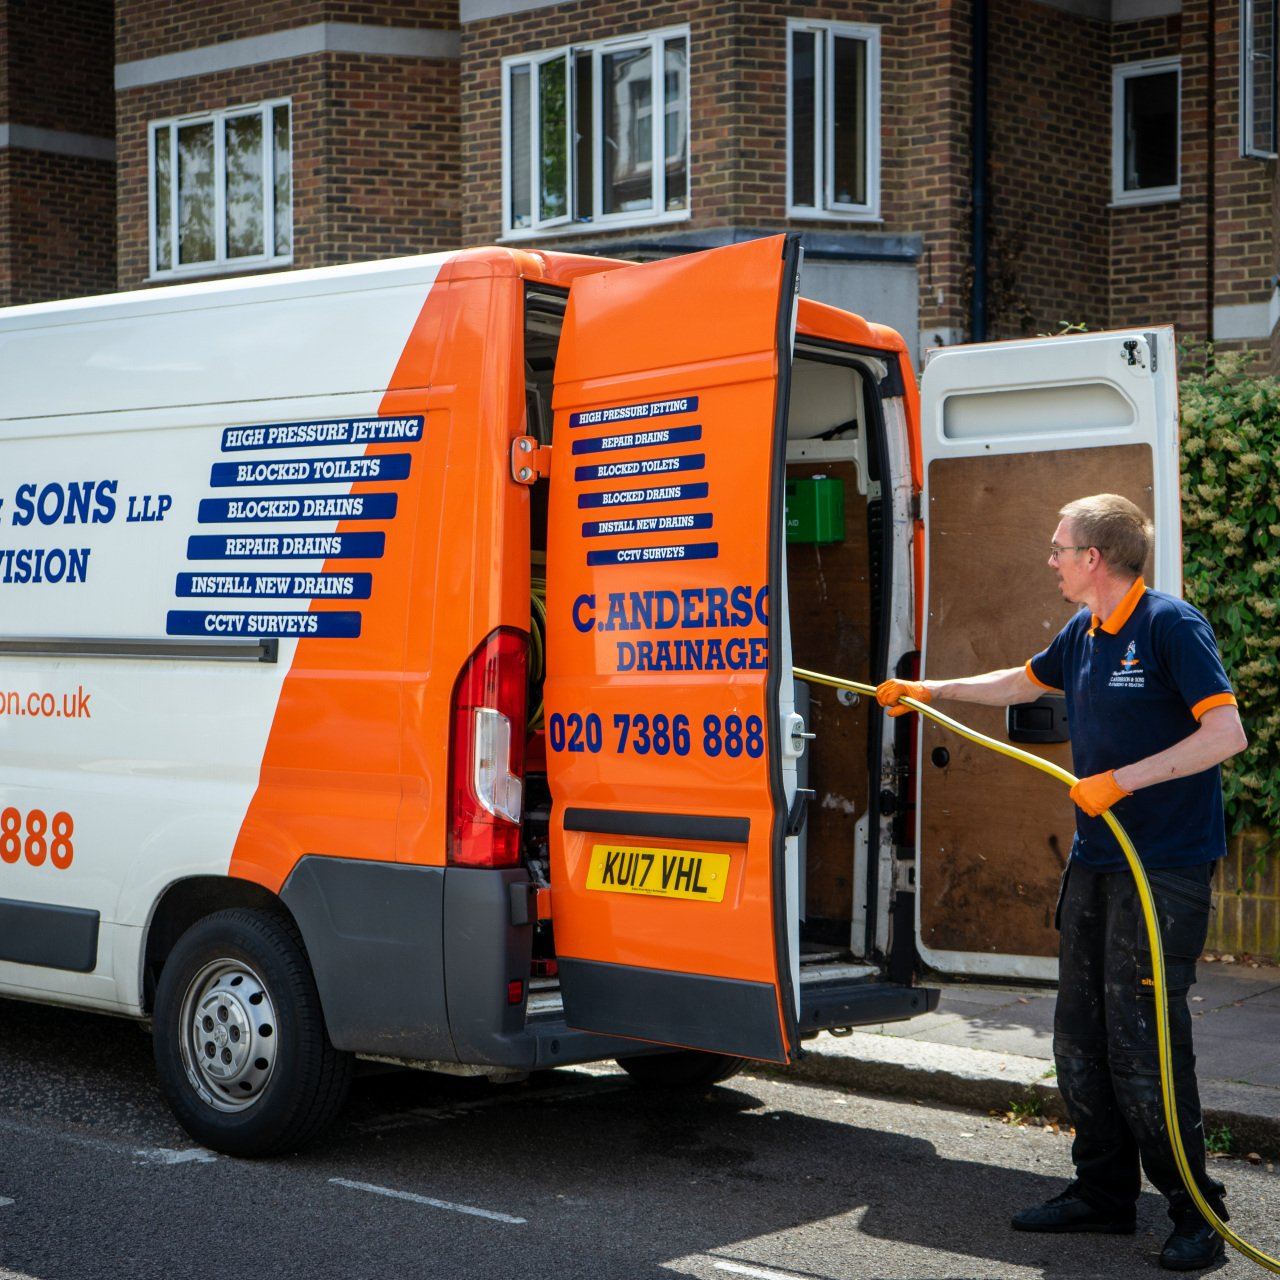 Drain jetting - Blocked Drains - Anderson and Sons